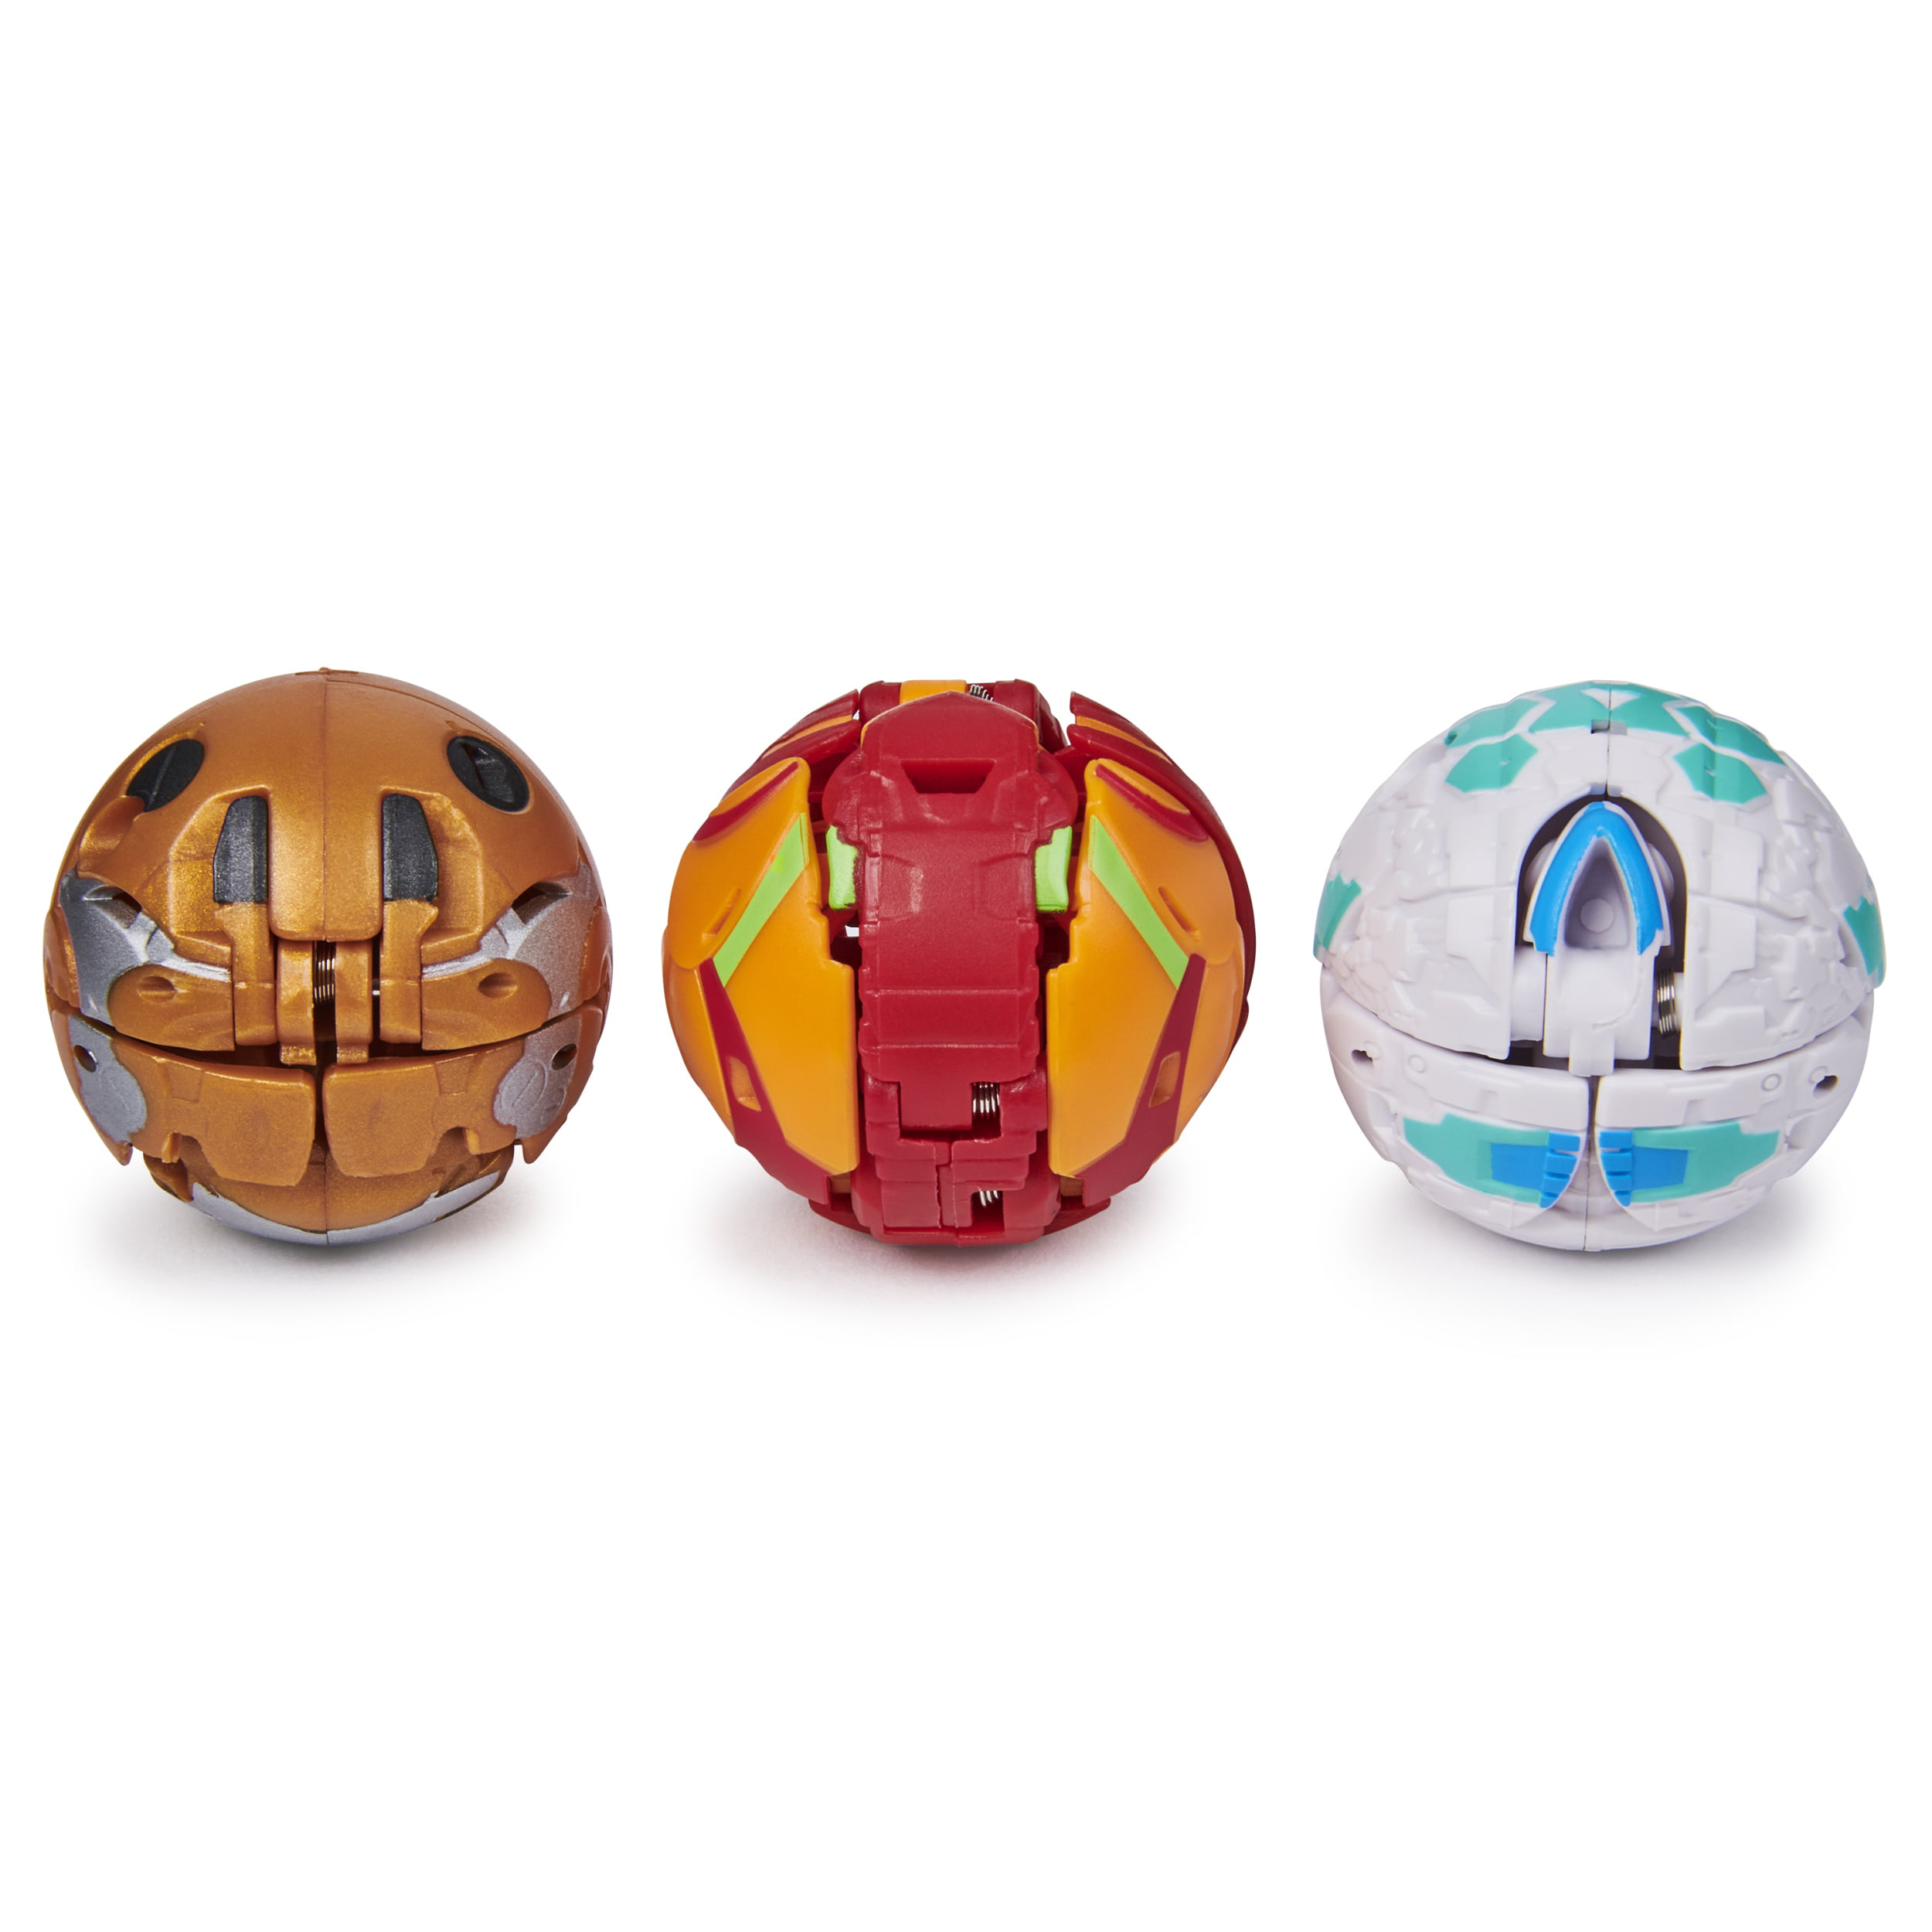  Bakugan Starter Pack 3-Pack, Pyrus Trunkaious, Collectible  Action Figures, for Ages 6 and up : Toys & Games